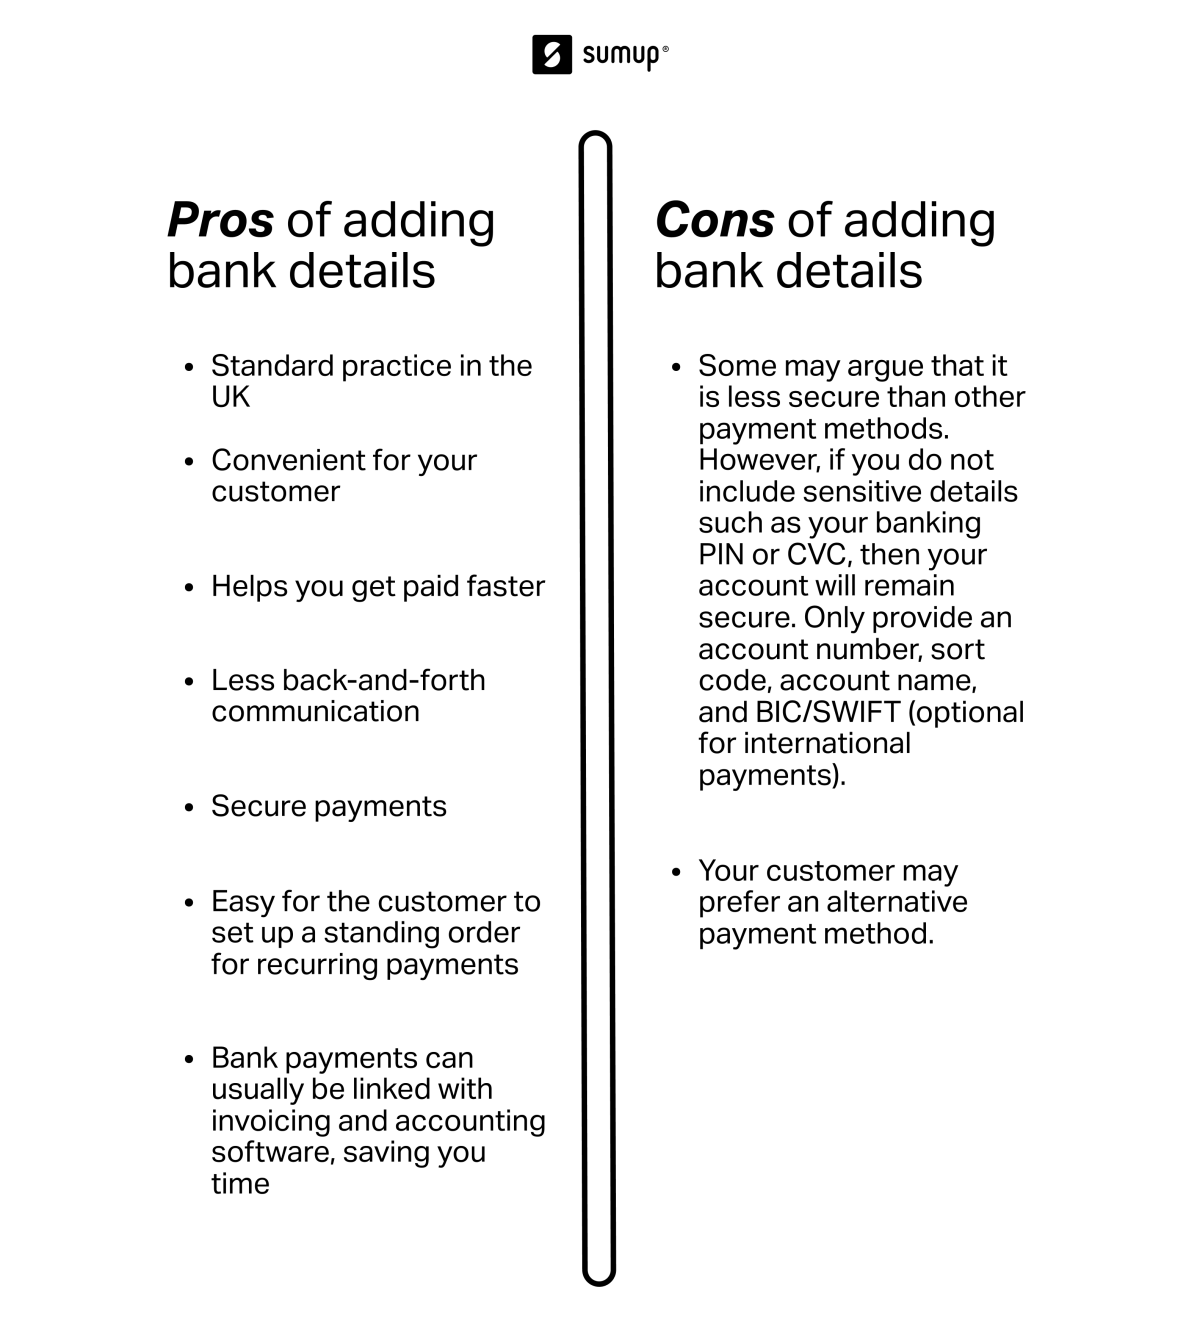 List showing the pros and cons of adding bank details to your invoices.